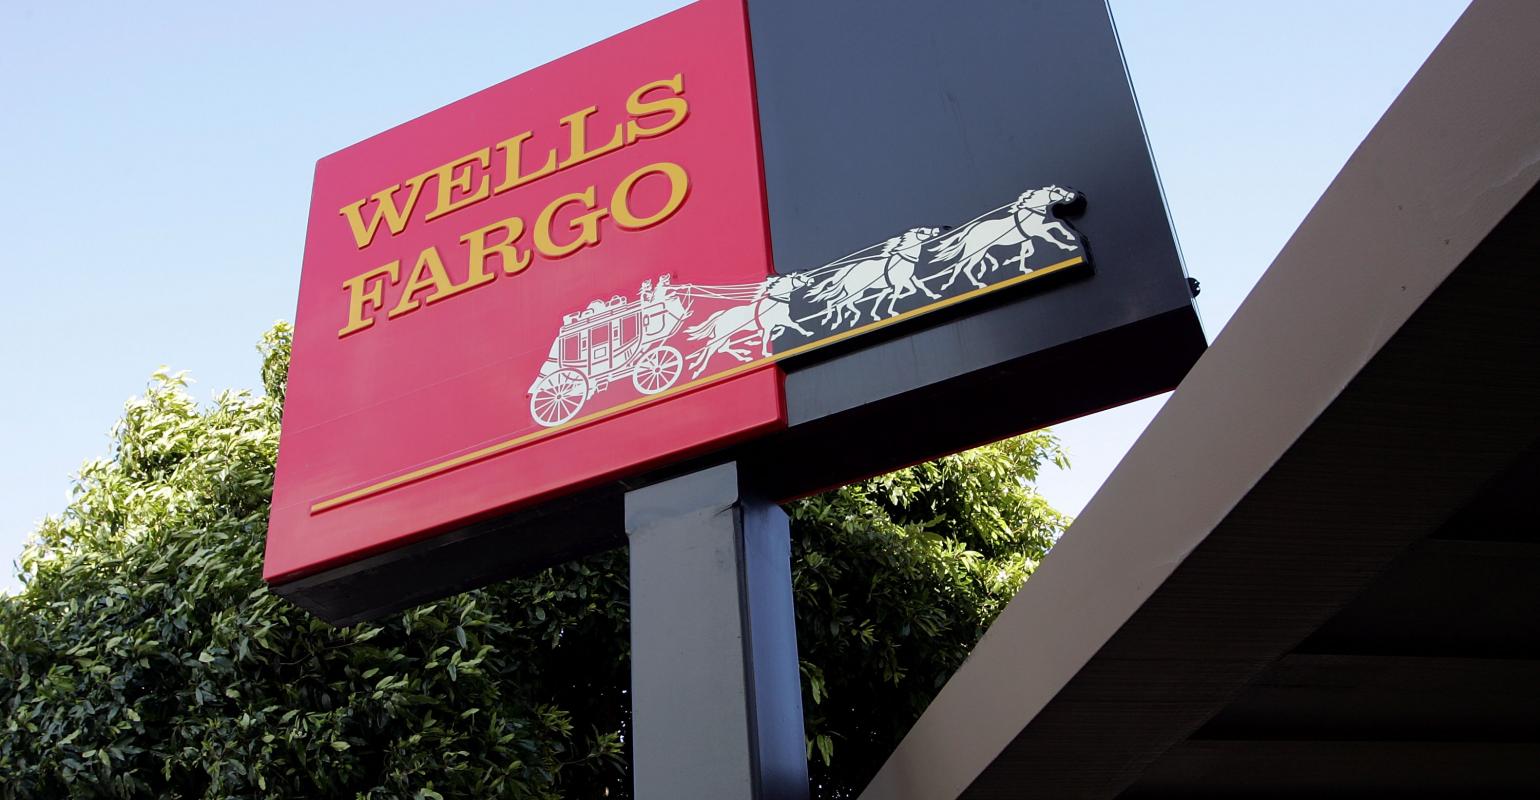 Wells Fargo's Branch Network Is a Potent Competitive Advantage